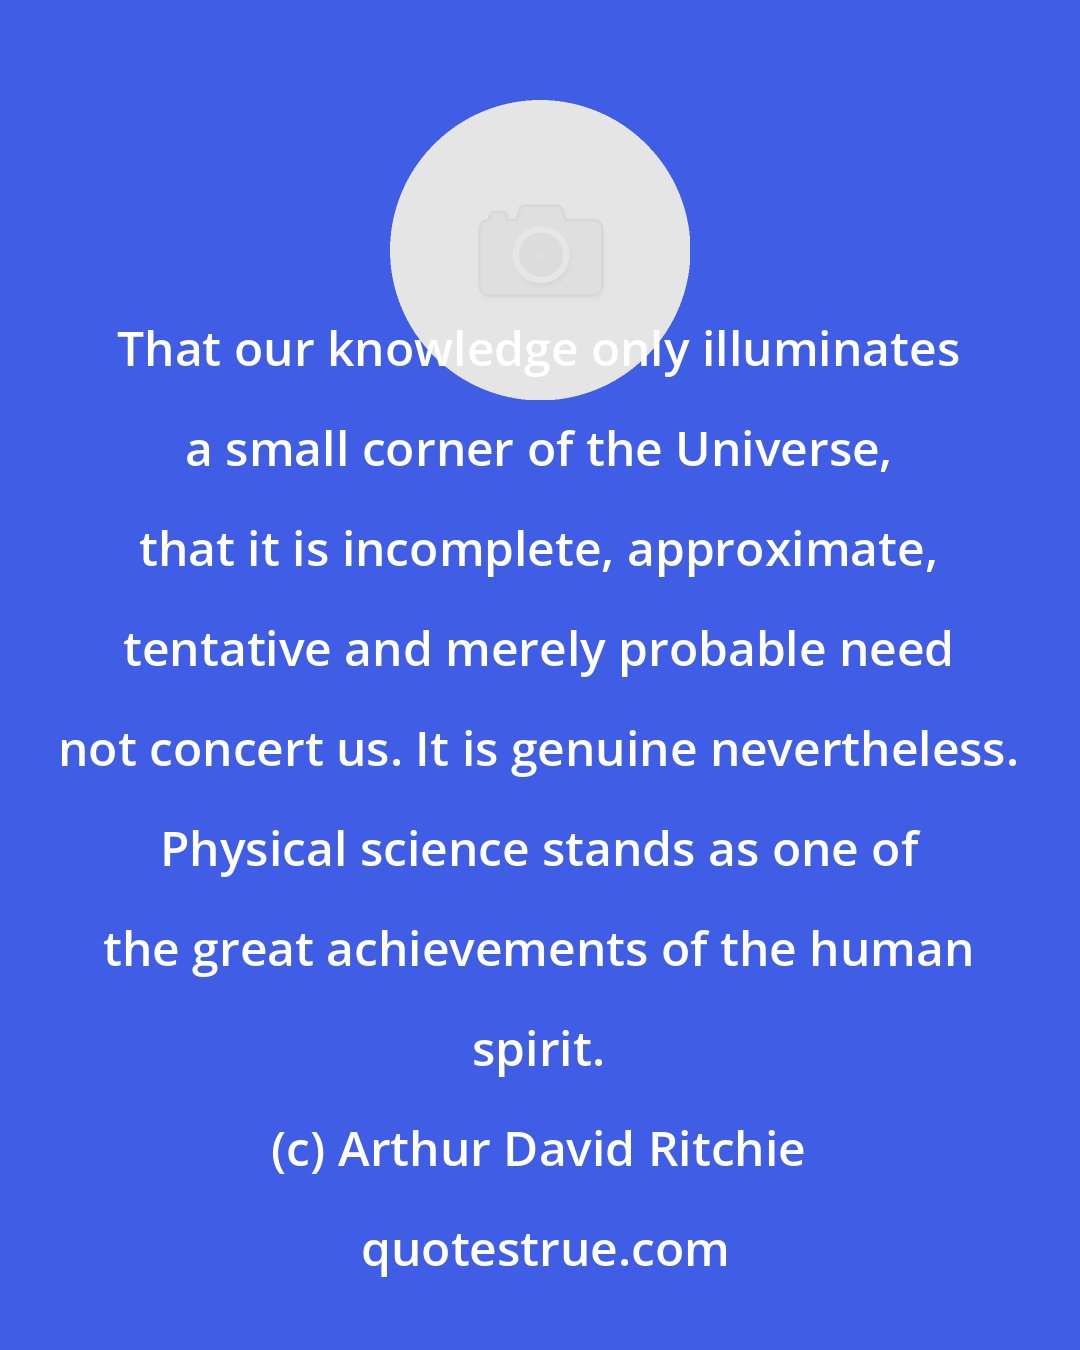 Arthur David Ritchie: That our knowledge only illuminates a small corner of the Universe, that it is incomplete, approximate, tentative and merely probable need not concert us. It is genuine nevertheless. Physical science stands as one of the great achievements of the human spirit.